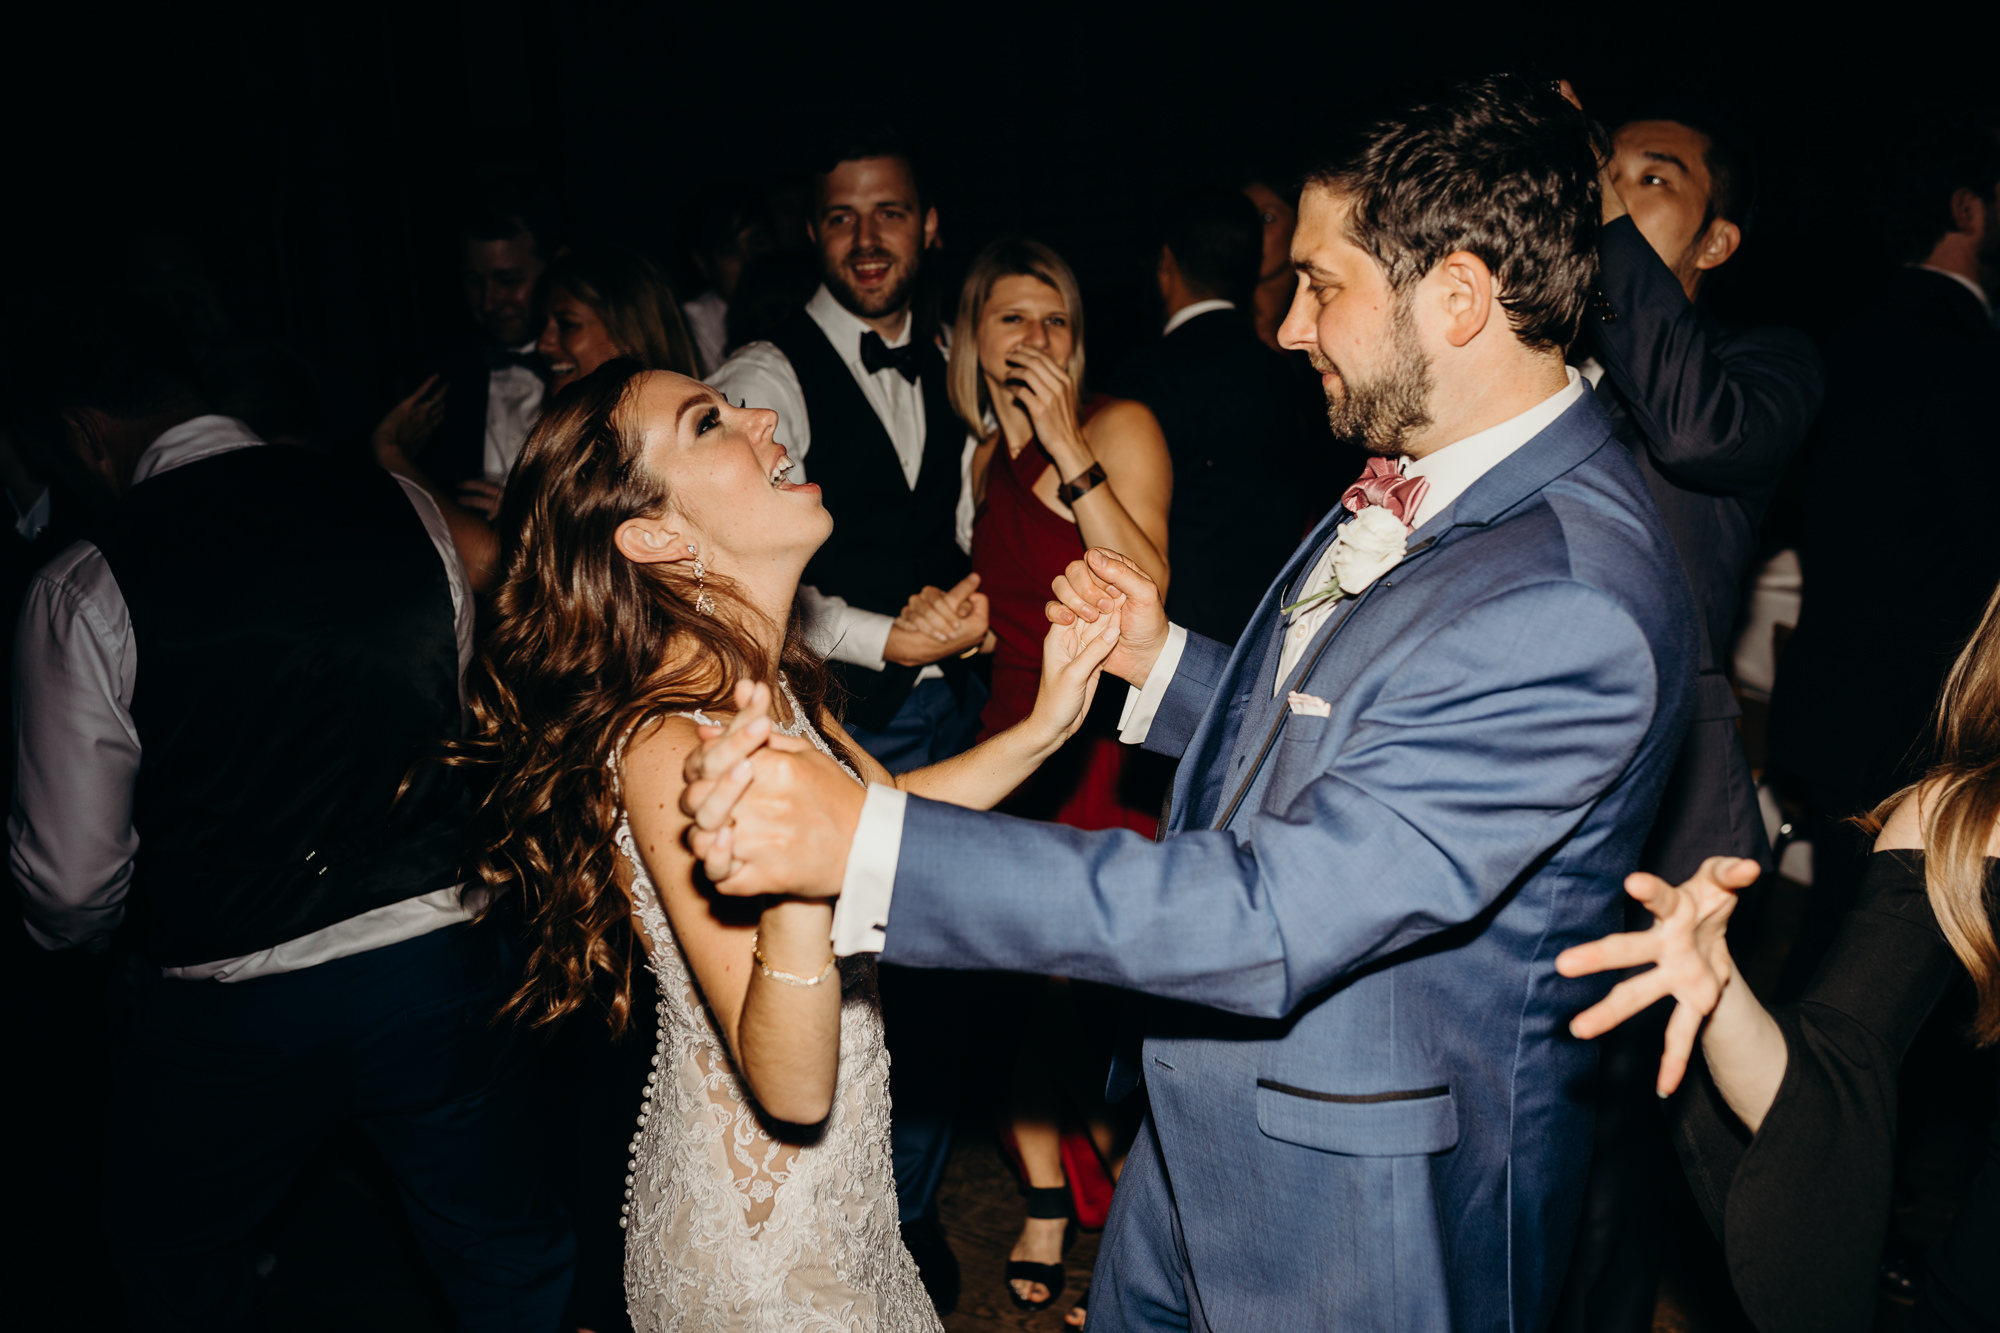 a bride and groom dance during their wedding reception at city winery in new york city, new york